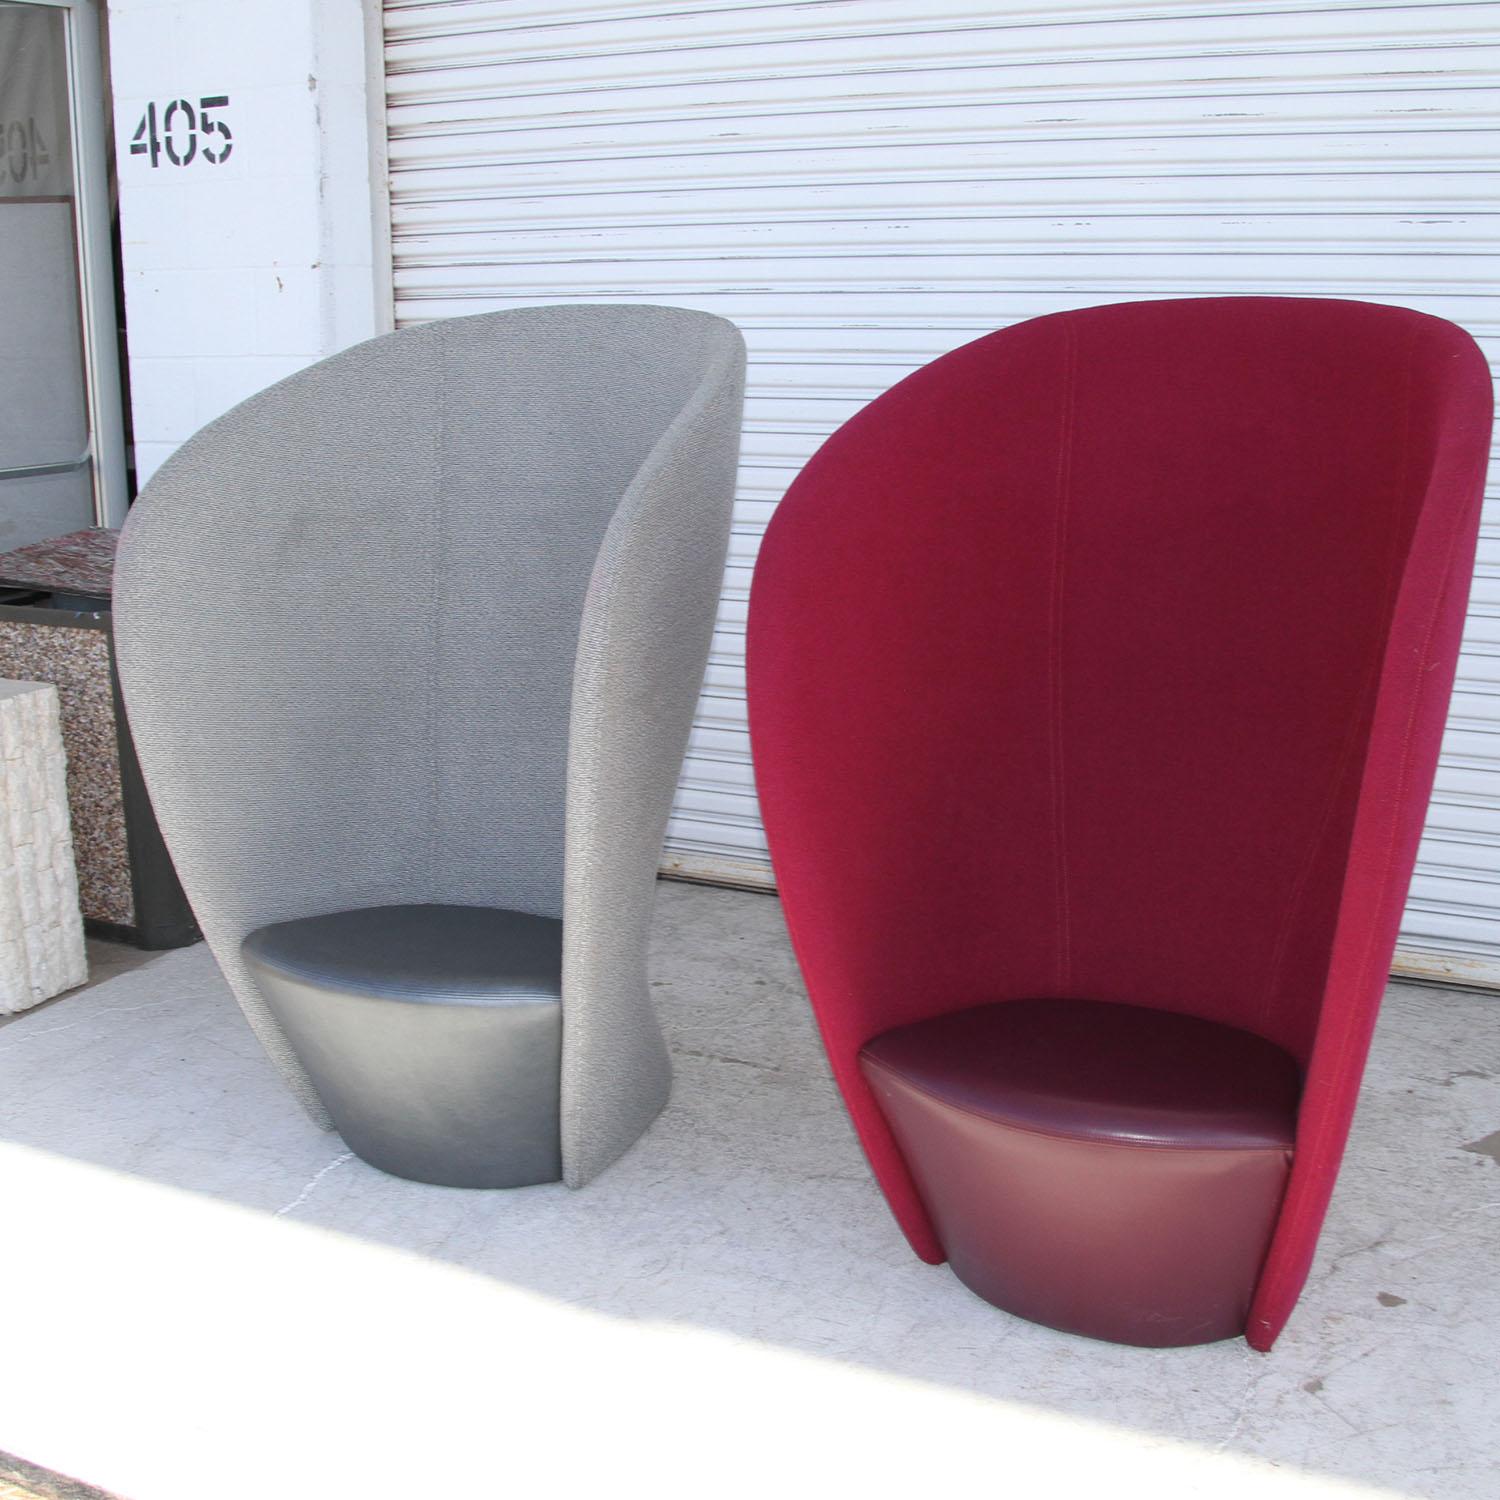 1 Hightower Shelter Lounge Chair For Sale 1